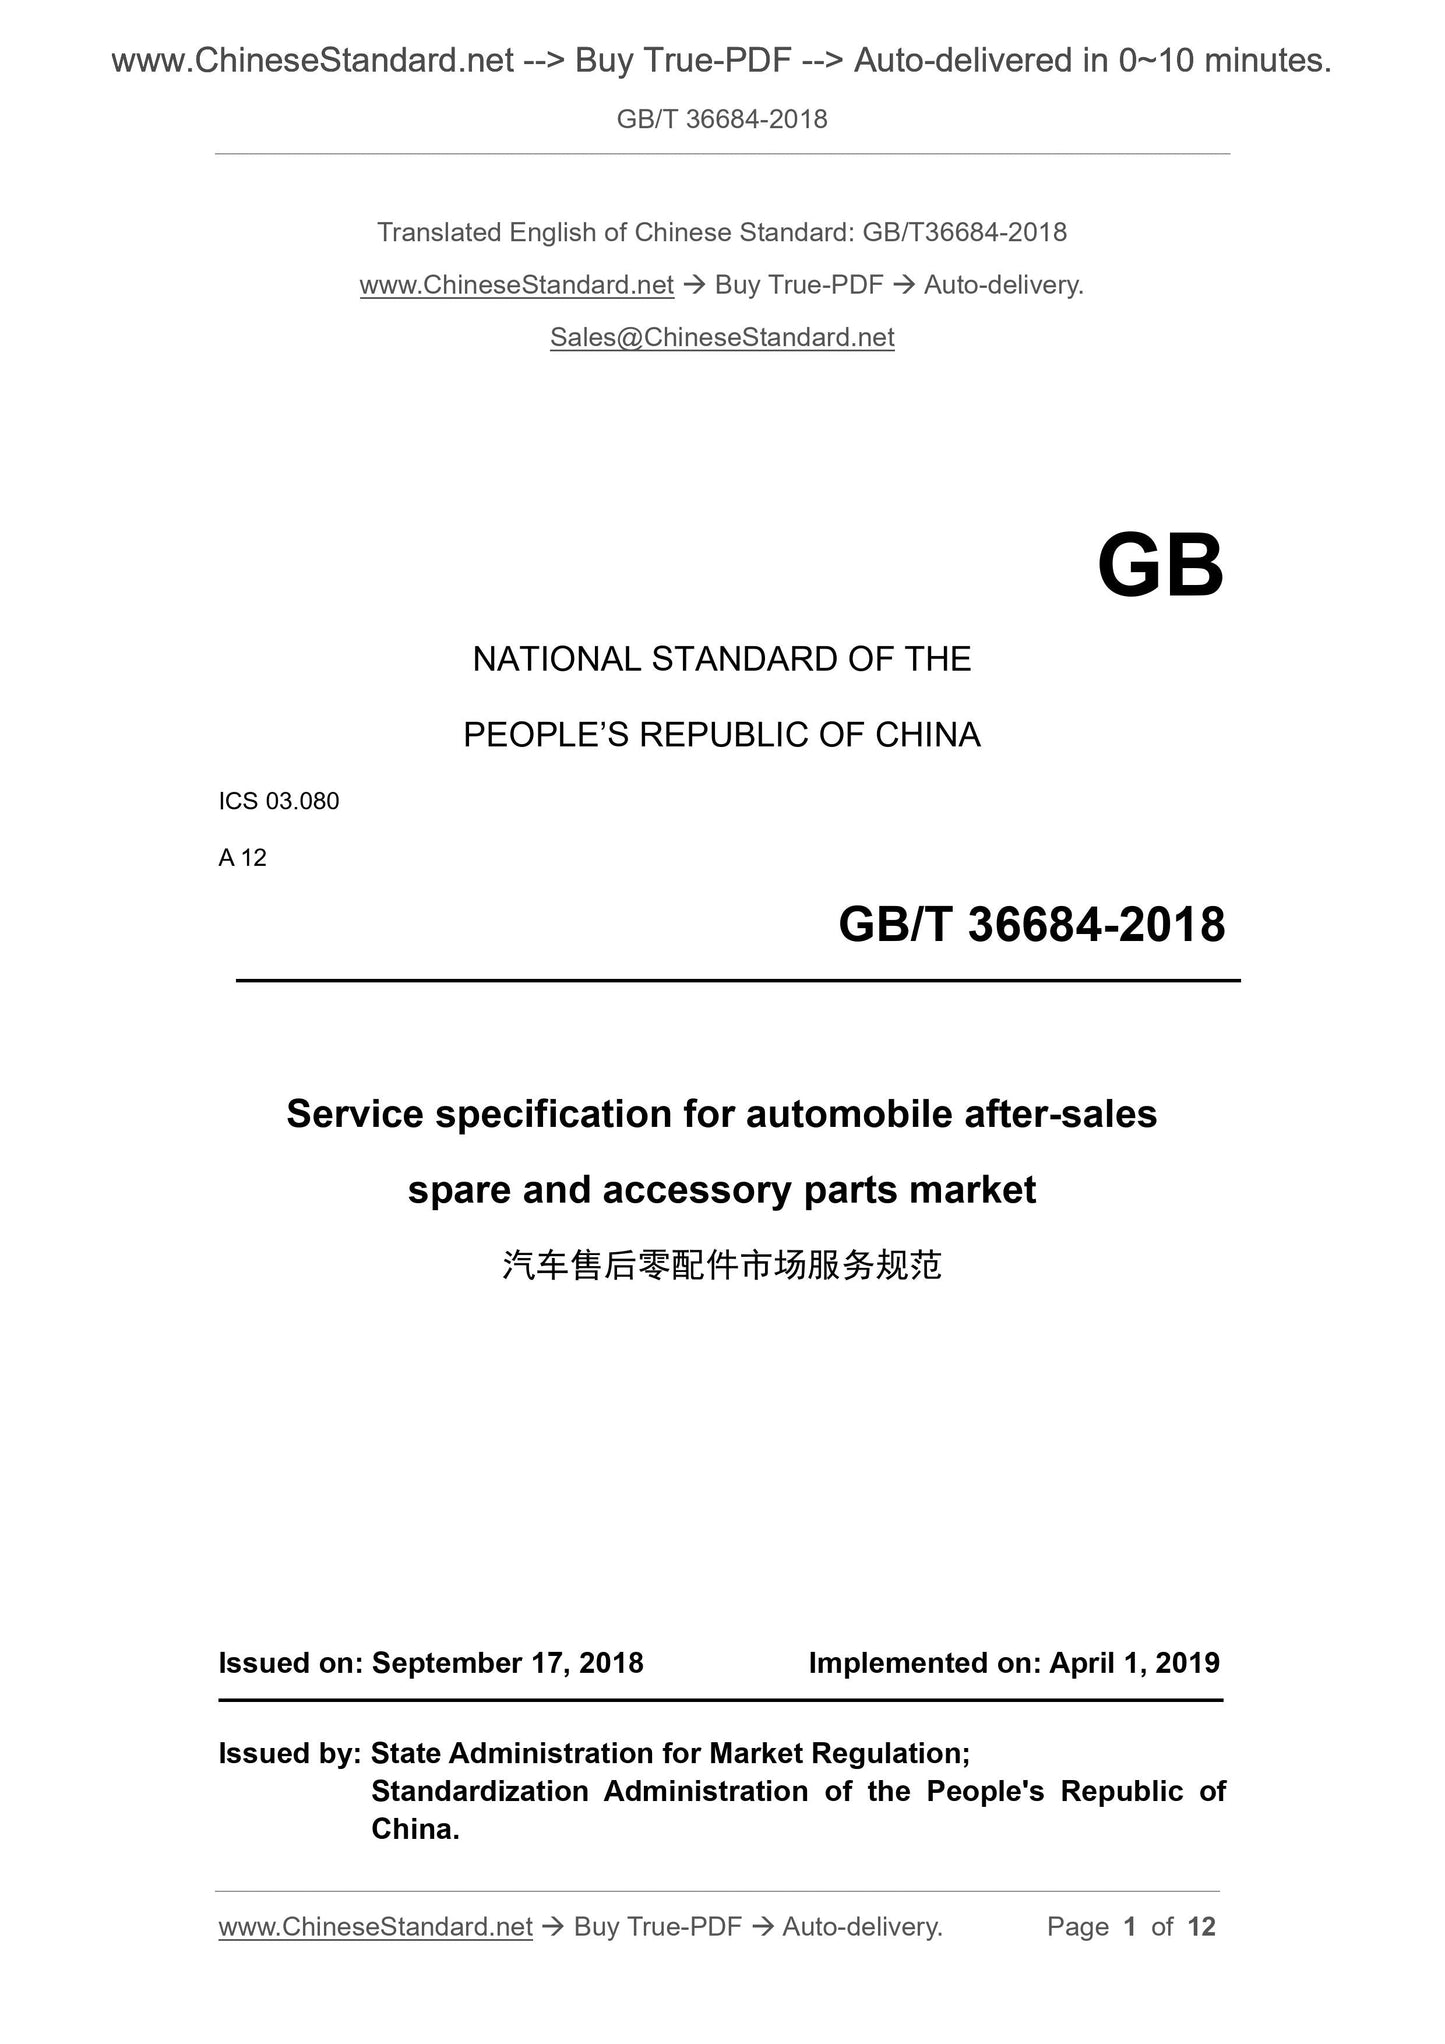 GB/T 36684-2018 Page 1